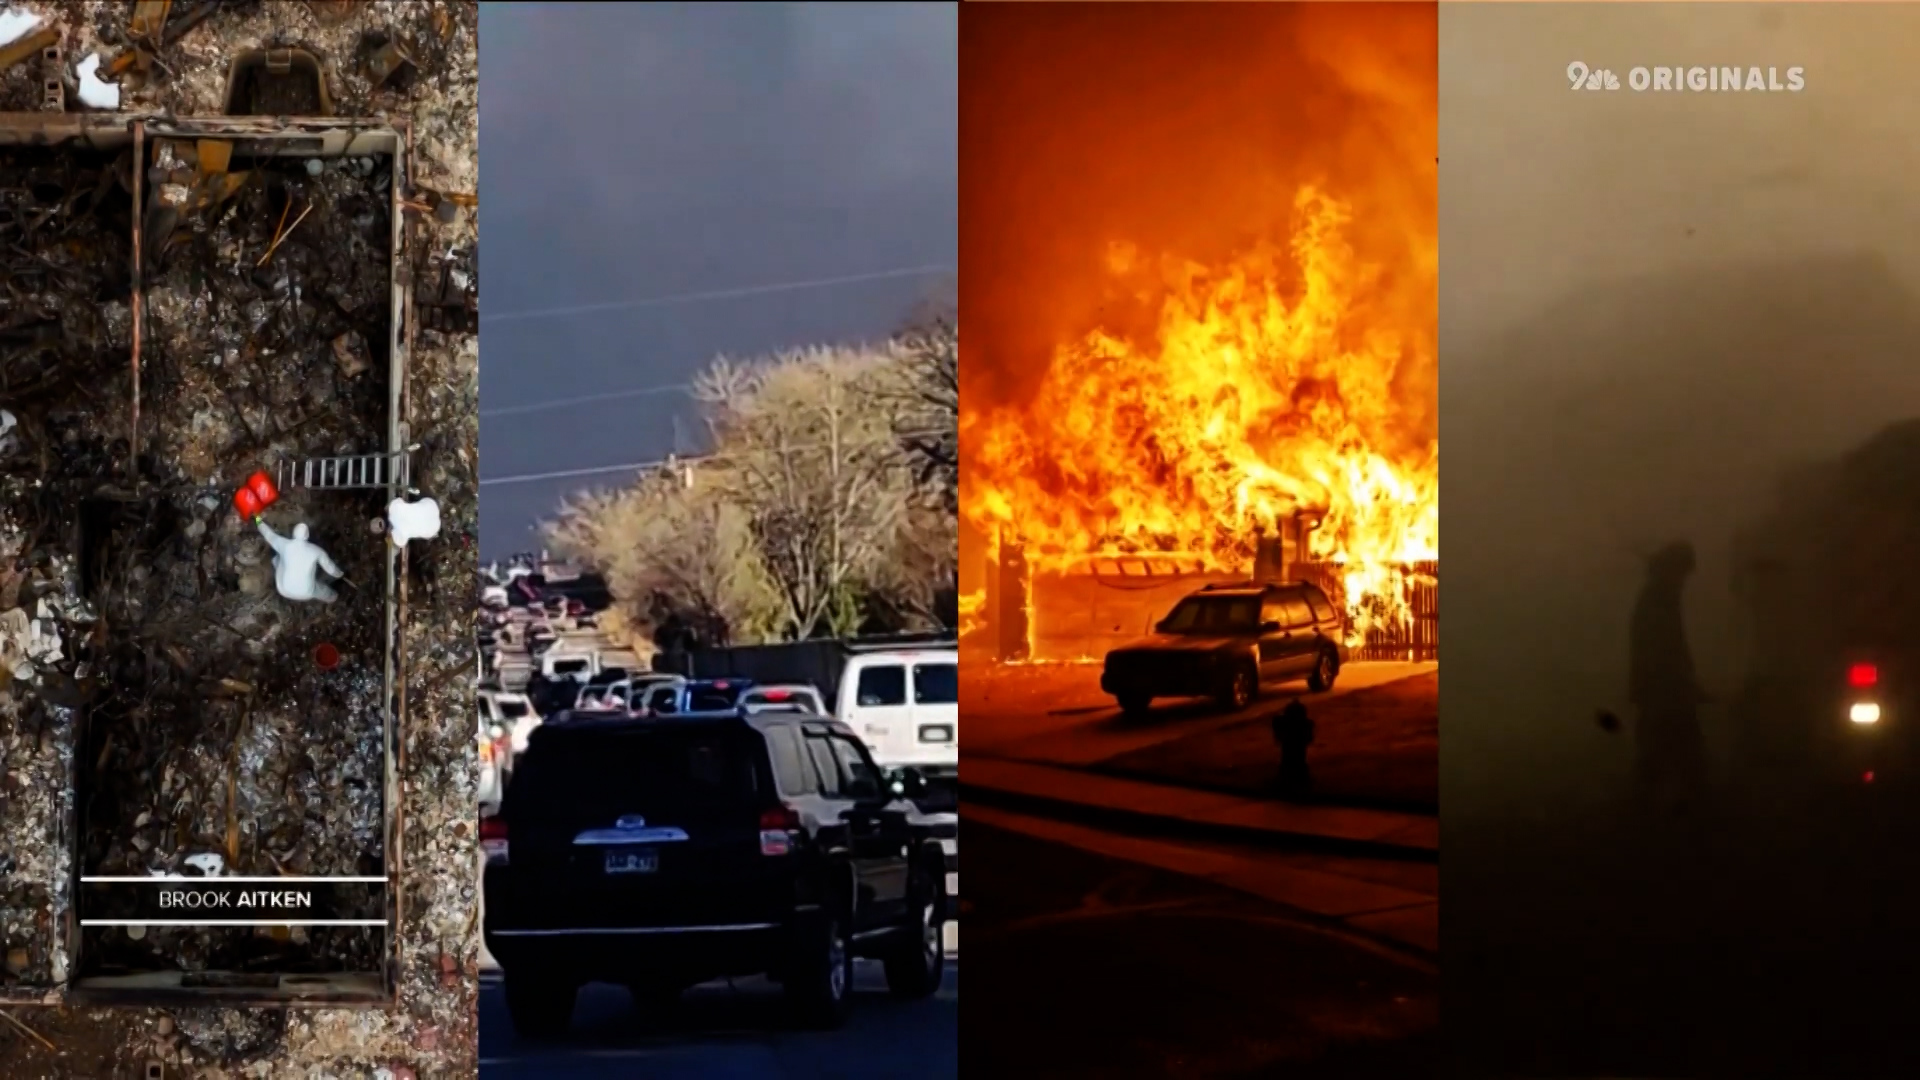 Several image stills have been captured showing fire response, a burning property, traffic, and a firefighter.